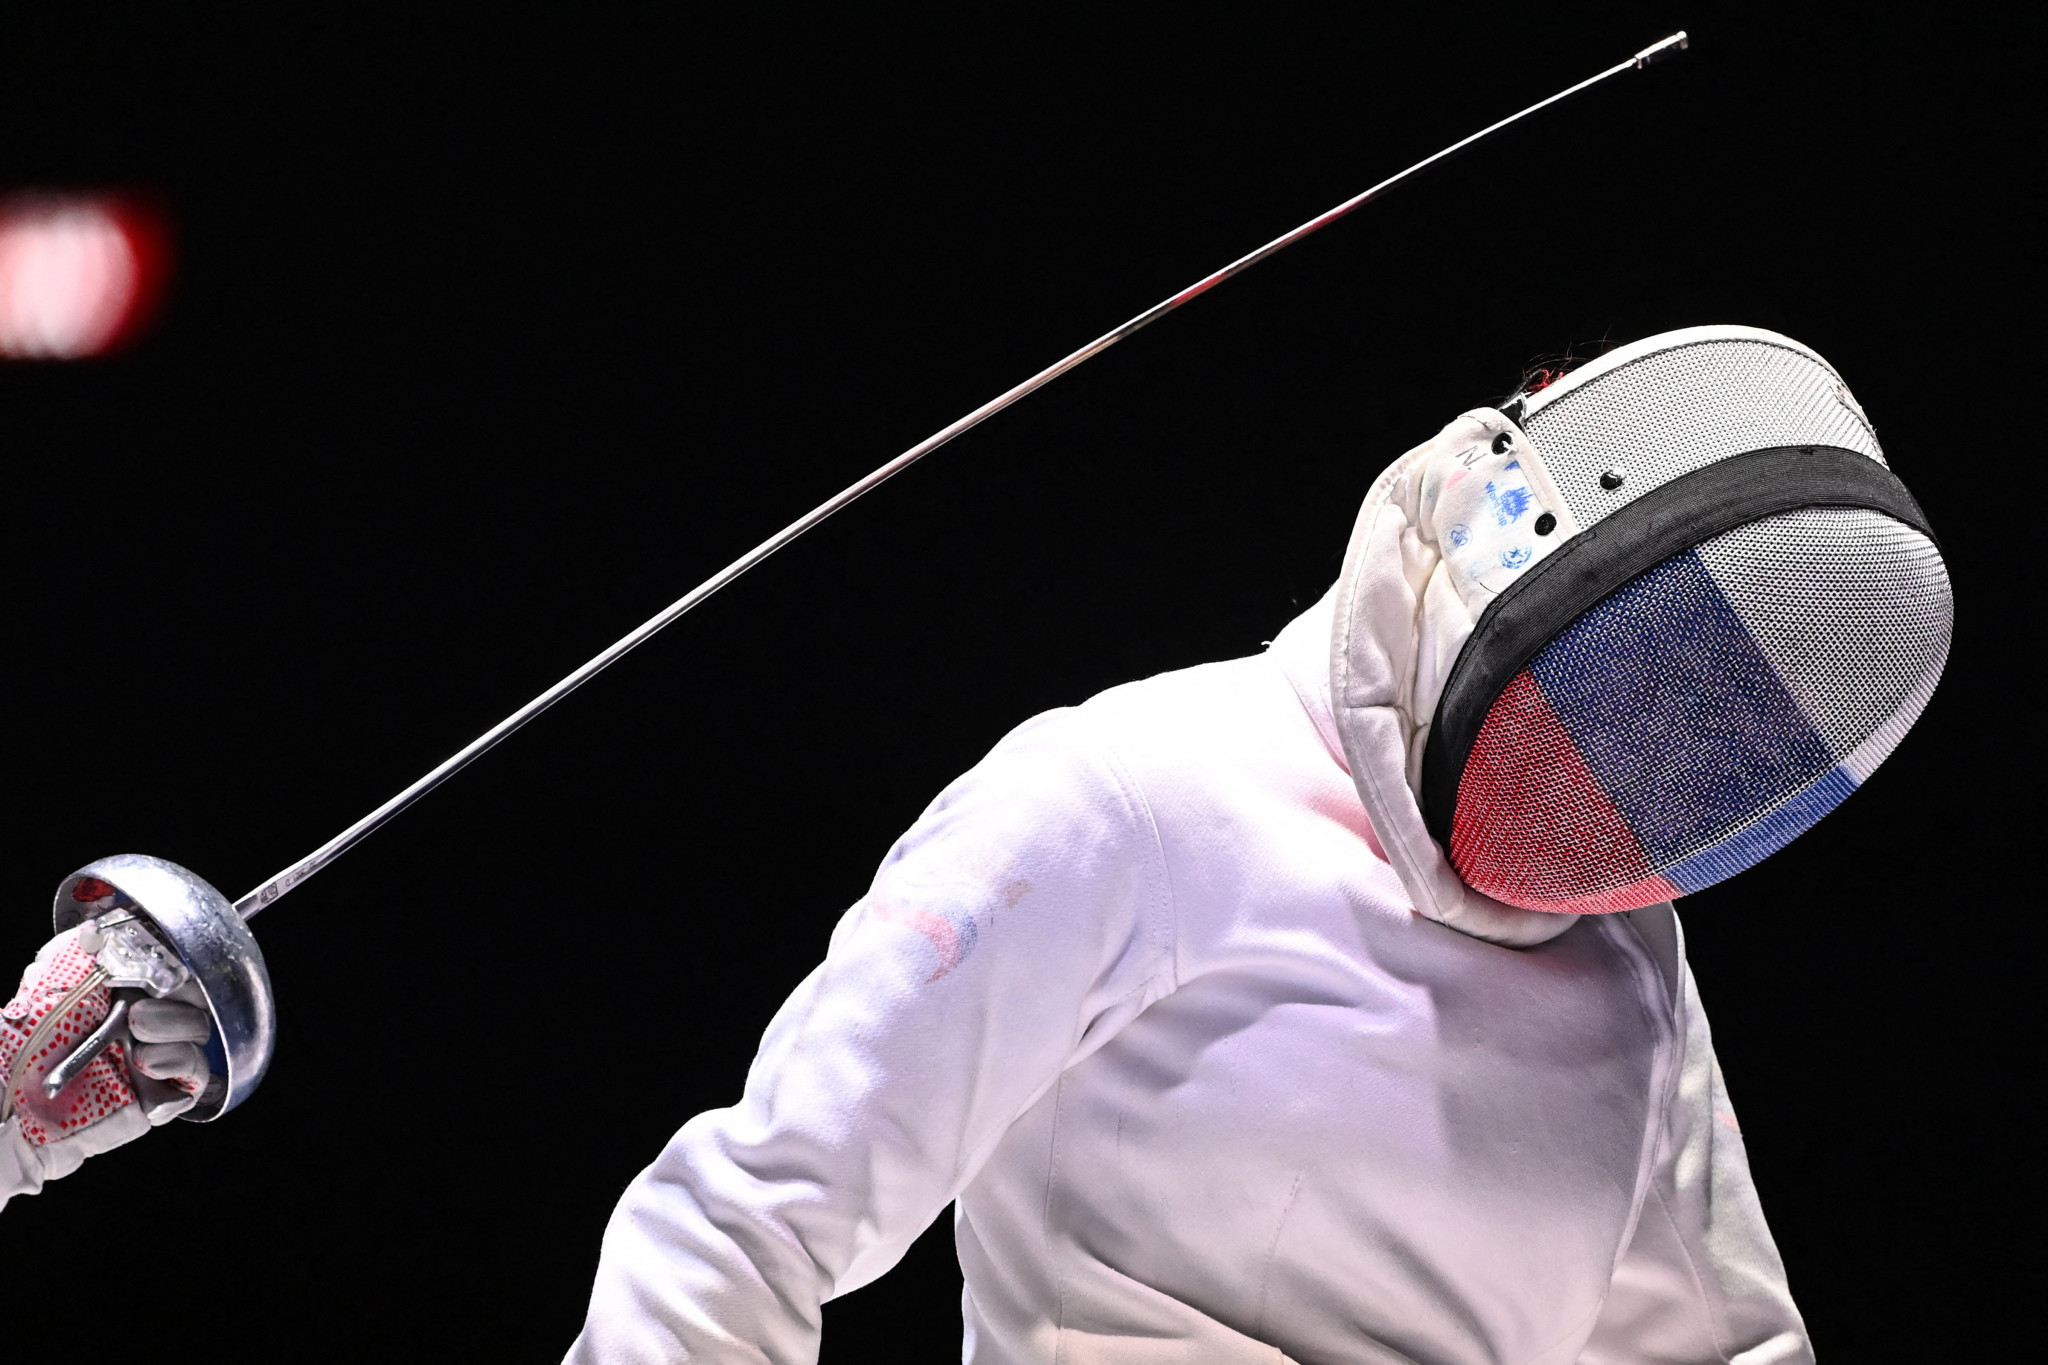 Russian fencers connected to the military or national security forces would be ruled out of competing in the FIE Women's Foil World Cup in Poznań ©Getty Images